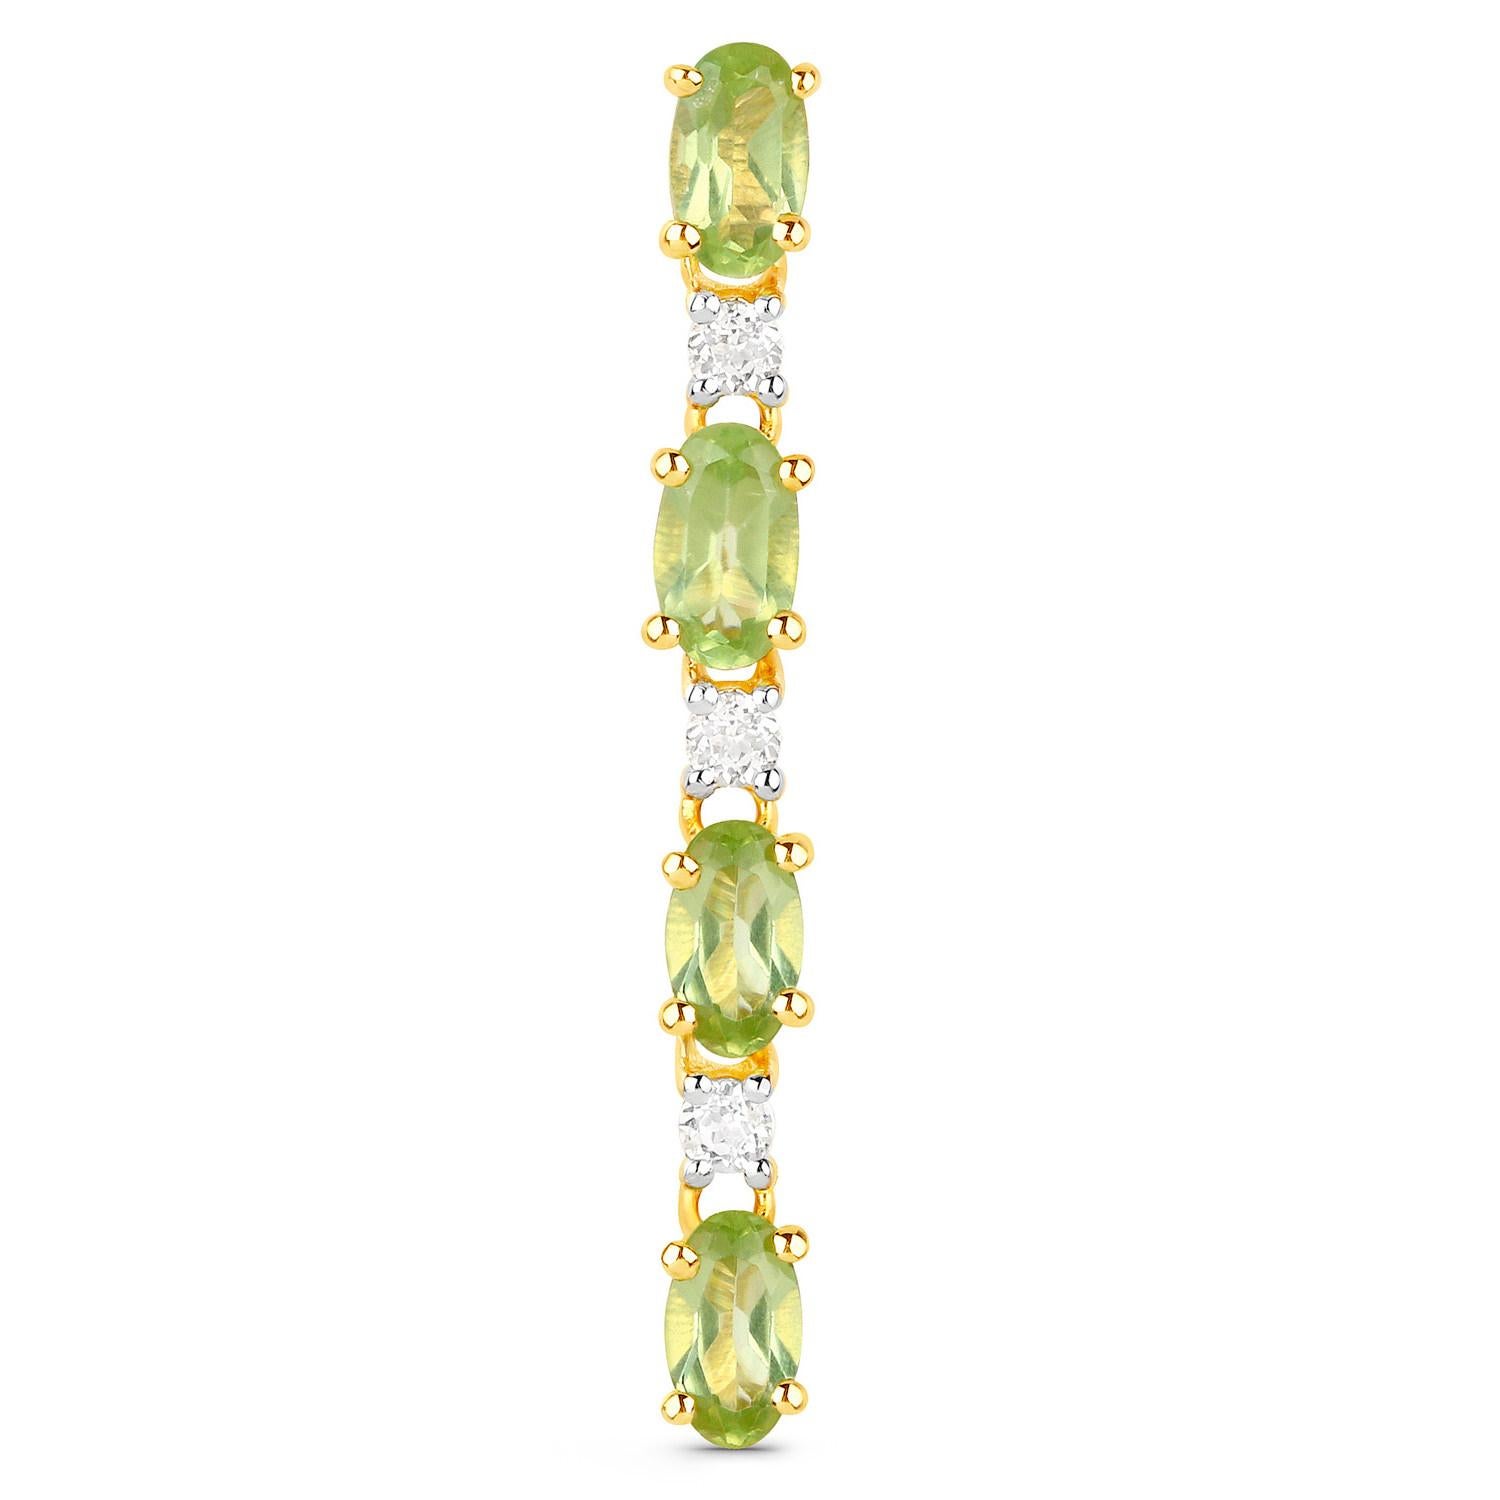 Oval Cut Natural Peridot Dangle Earrings White Topaz 2.1 Carats 18K Gold Plated Silver For Sale